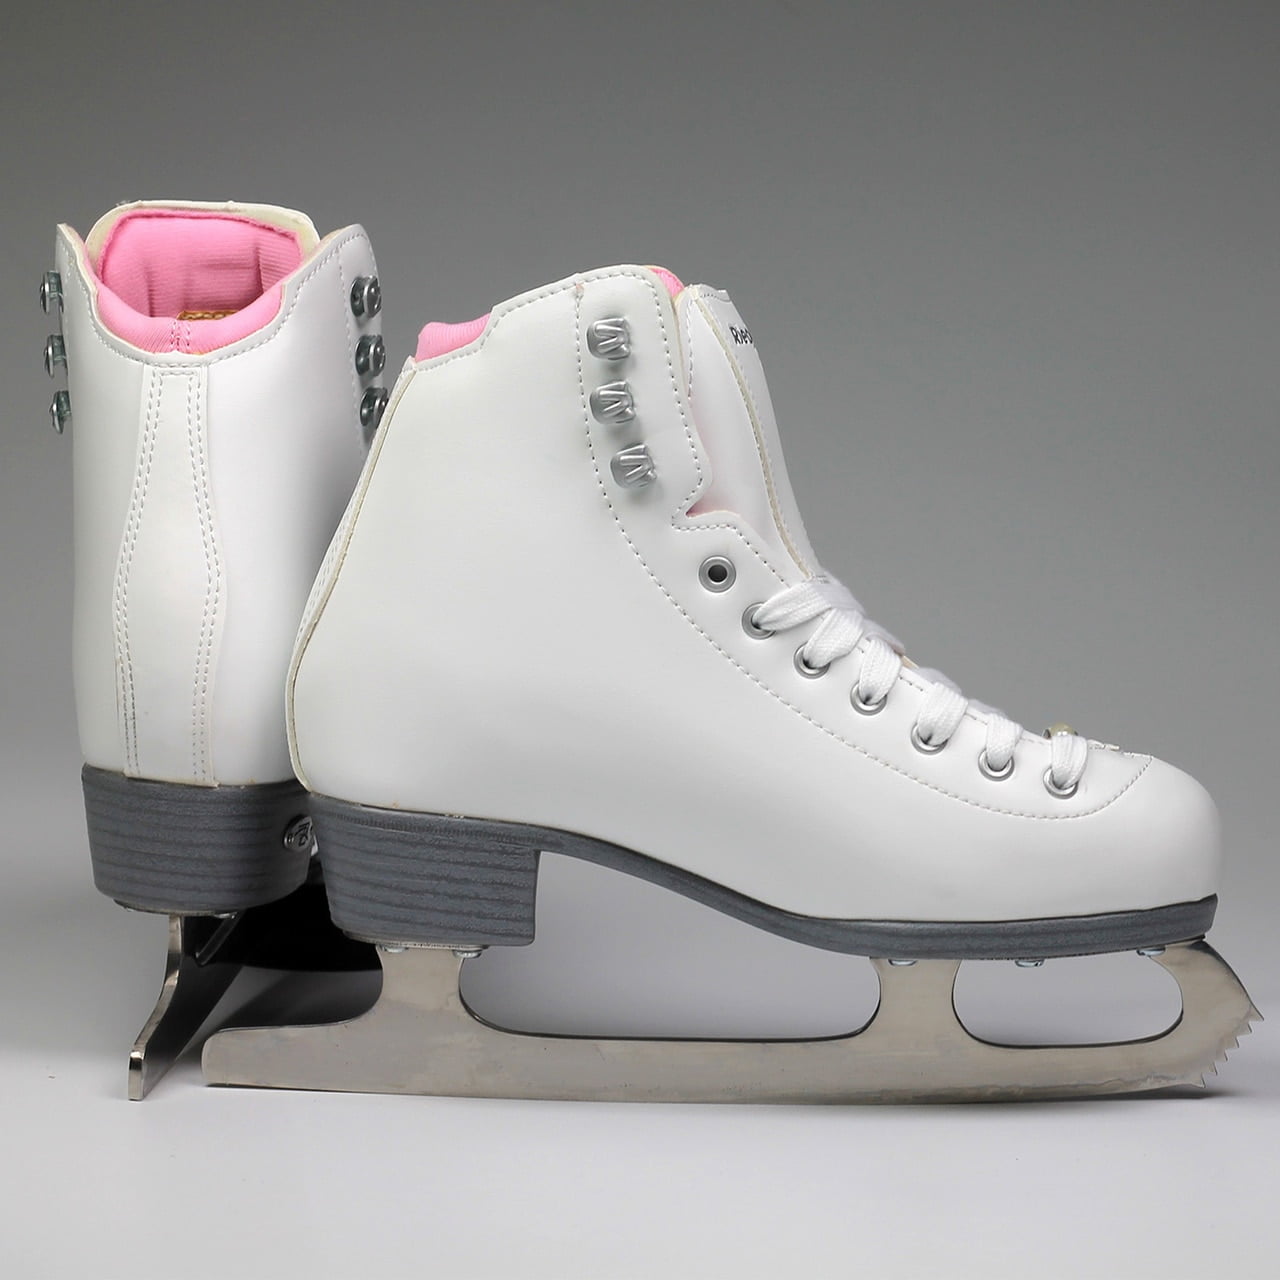 Details about   Riedell Pearl Ice Skates Size 5 